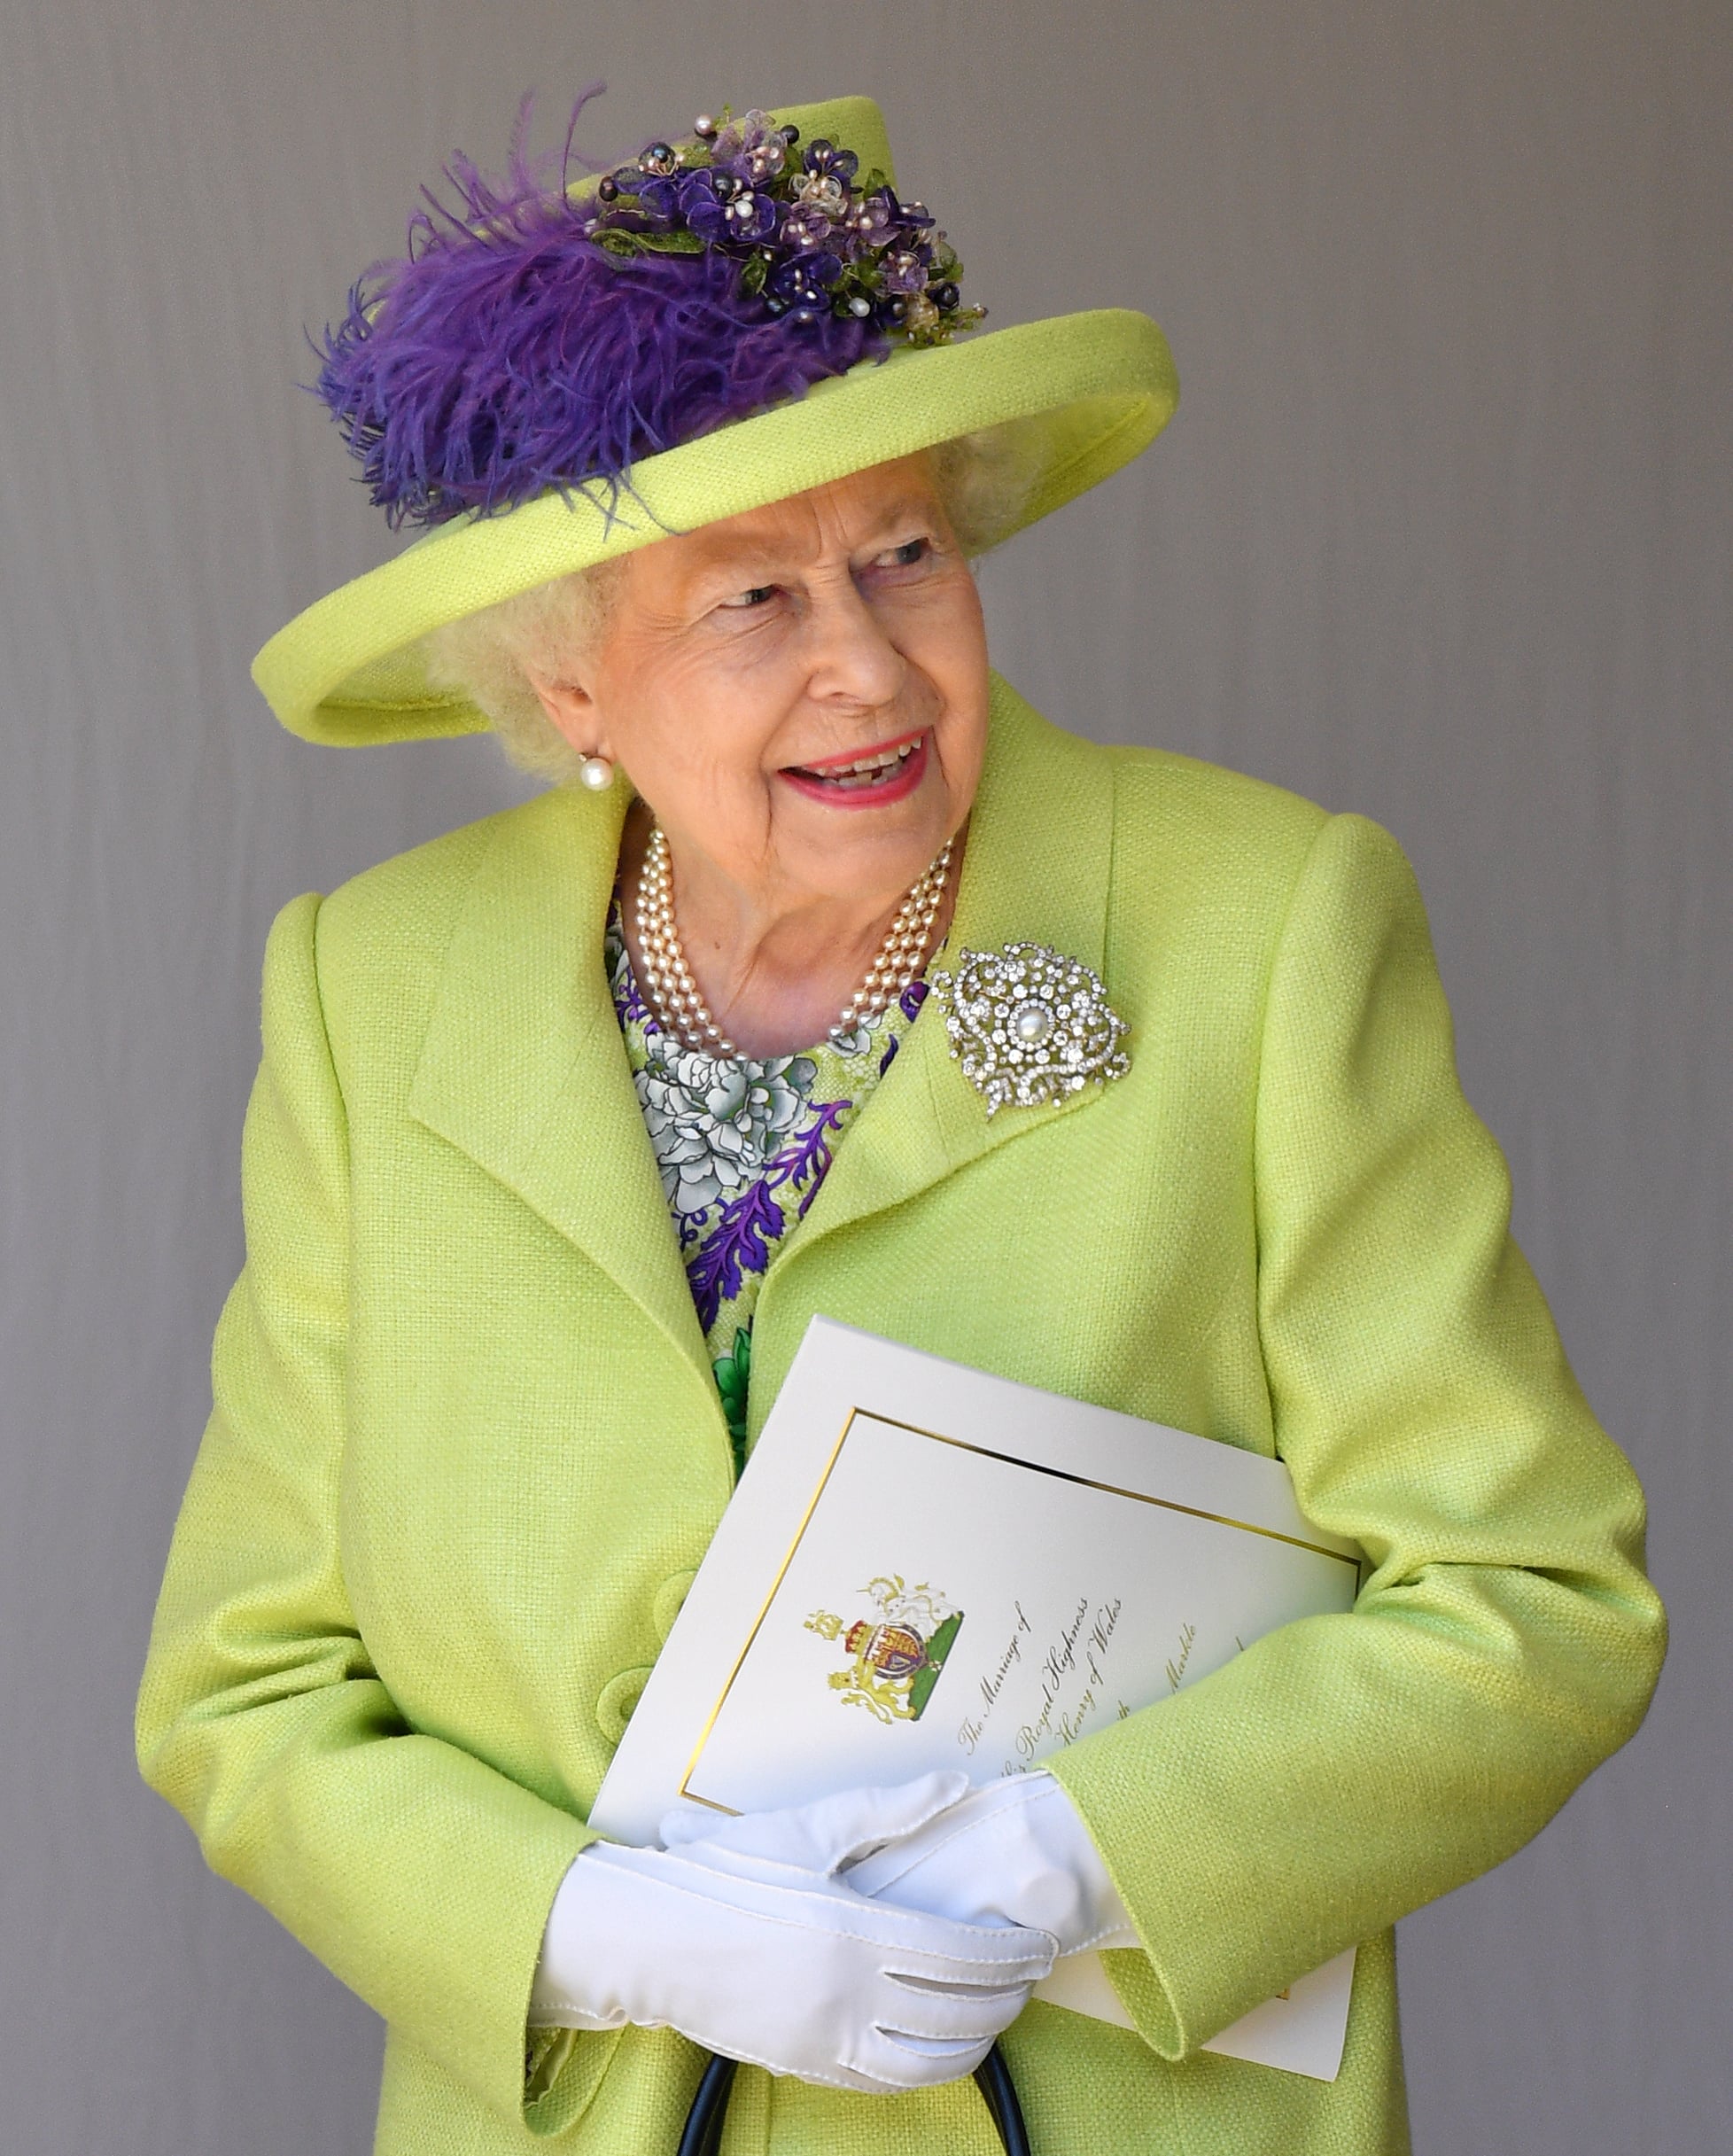 Queen Elizabeth II at the wedding of Prince Harry and Meghan Markle in 2018